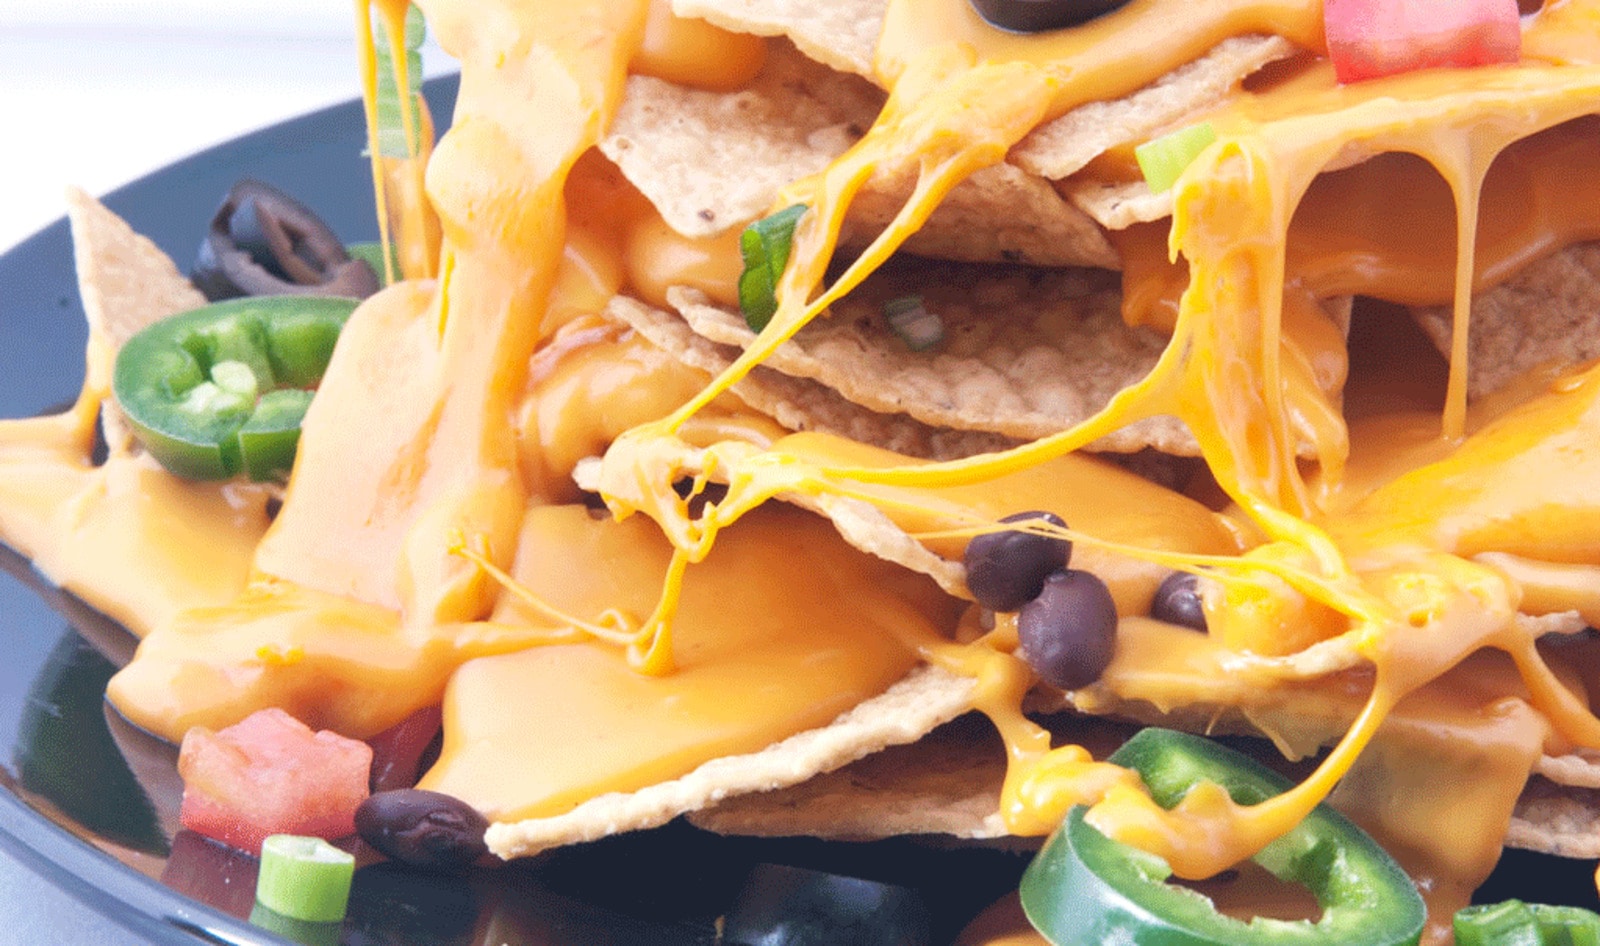 You Can Now Buy a 3-Pound Block of Vegan Nacho Cheese